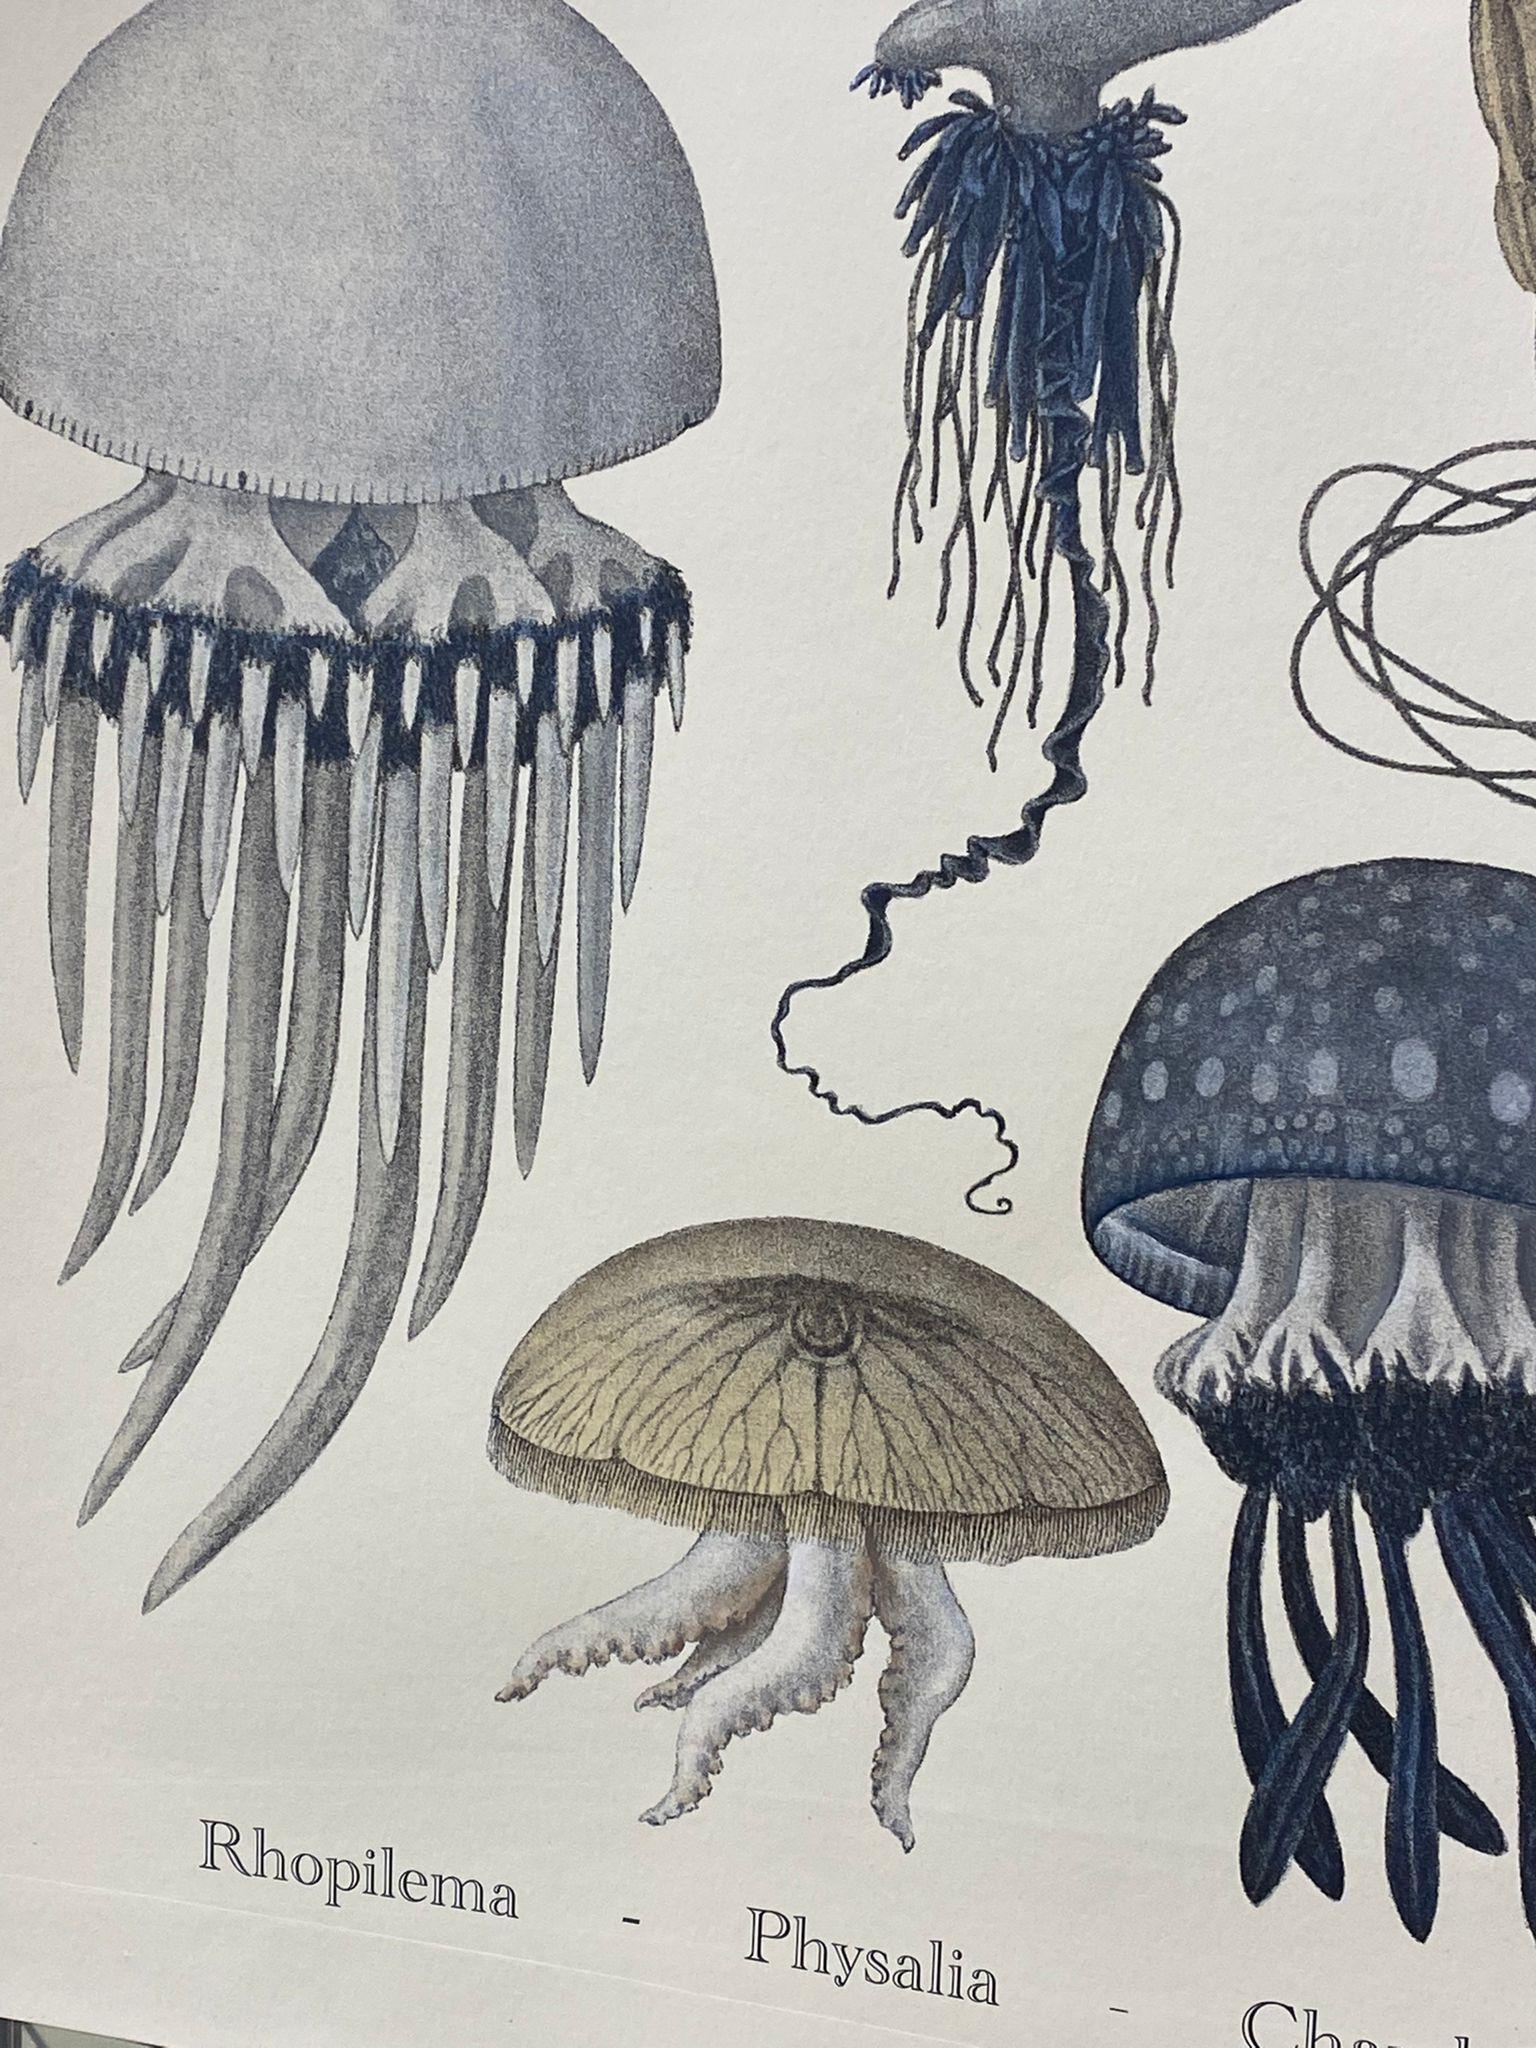 Elegant hand-watercoloured print representing Jellyfishs, from the Japanese Sea Life Series
This marine style print is available in 6 different natural representations to create a bright and joyful composition:
- Jellyfishes
- Crabs
- Corals
-